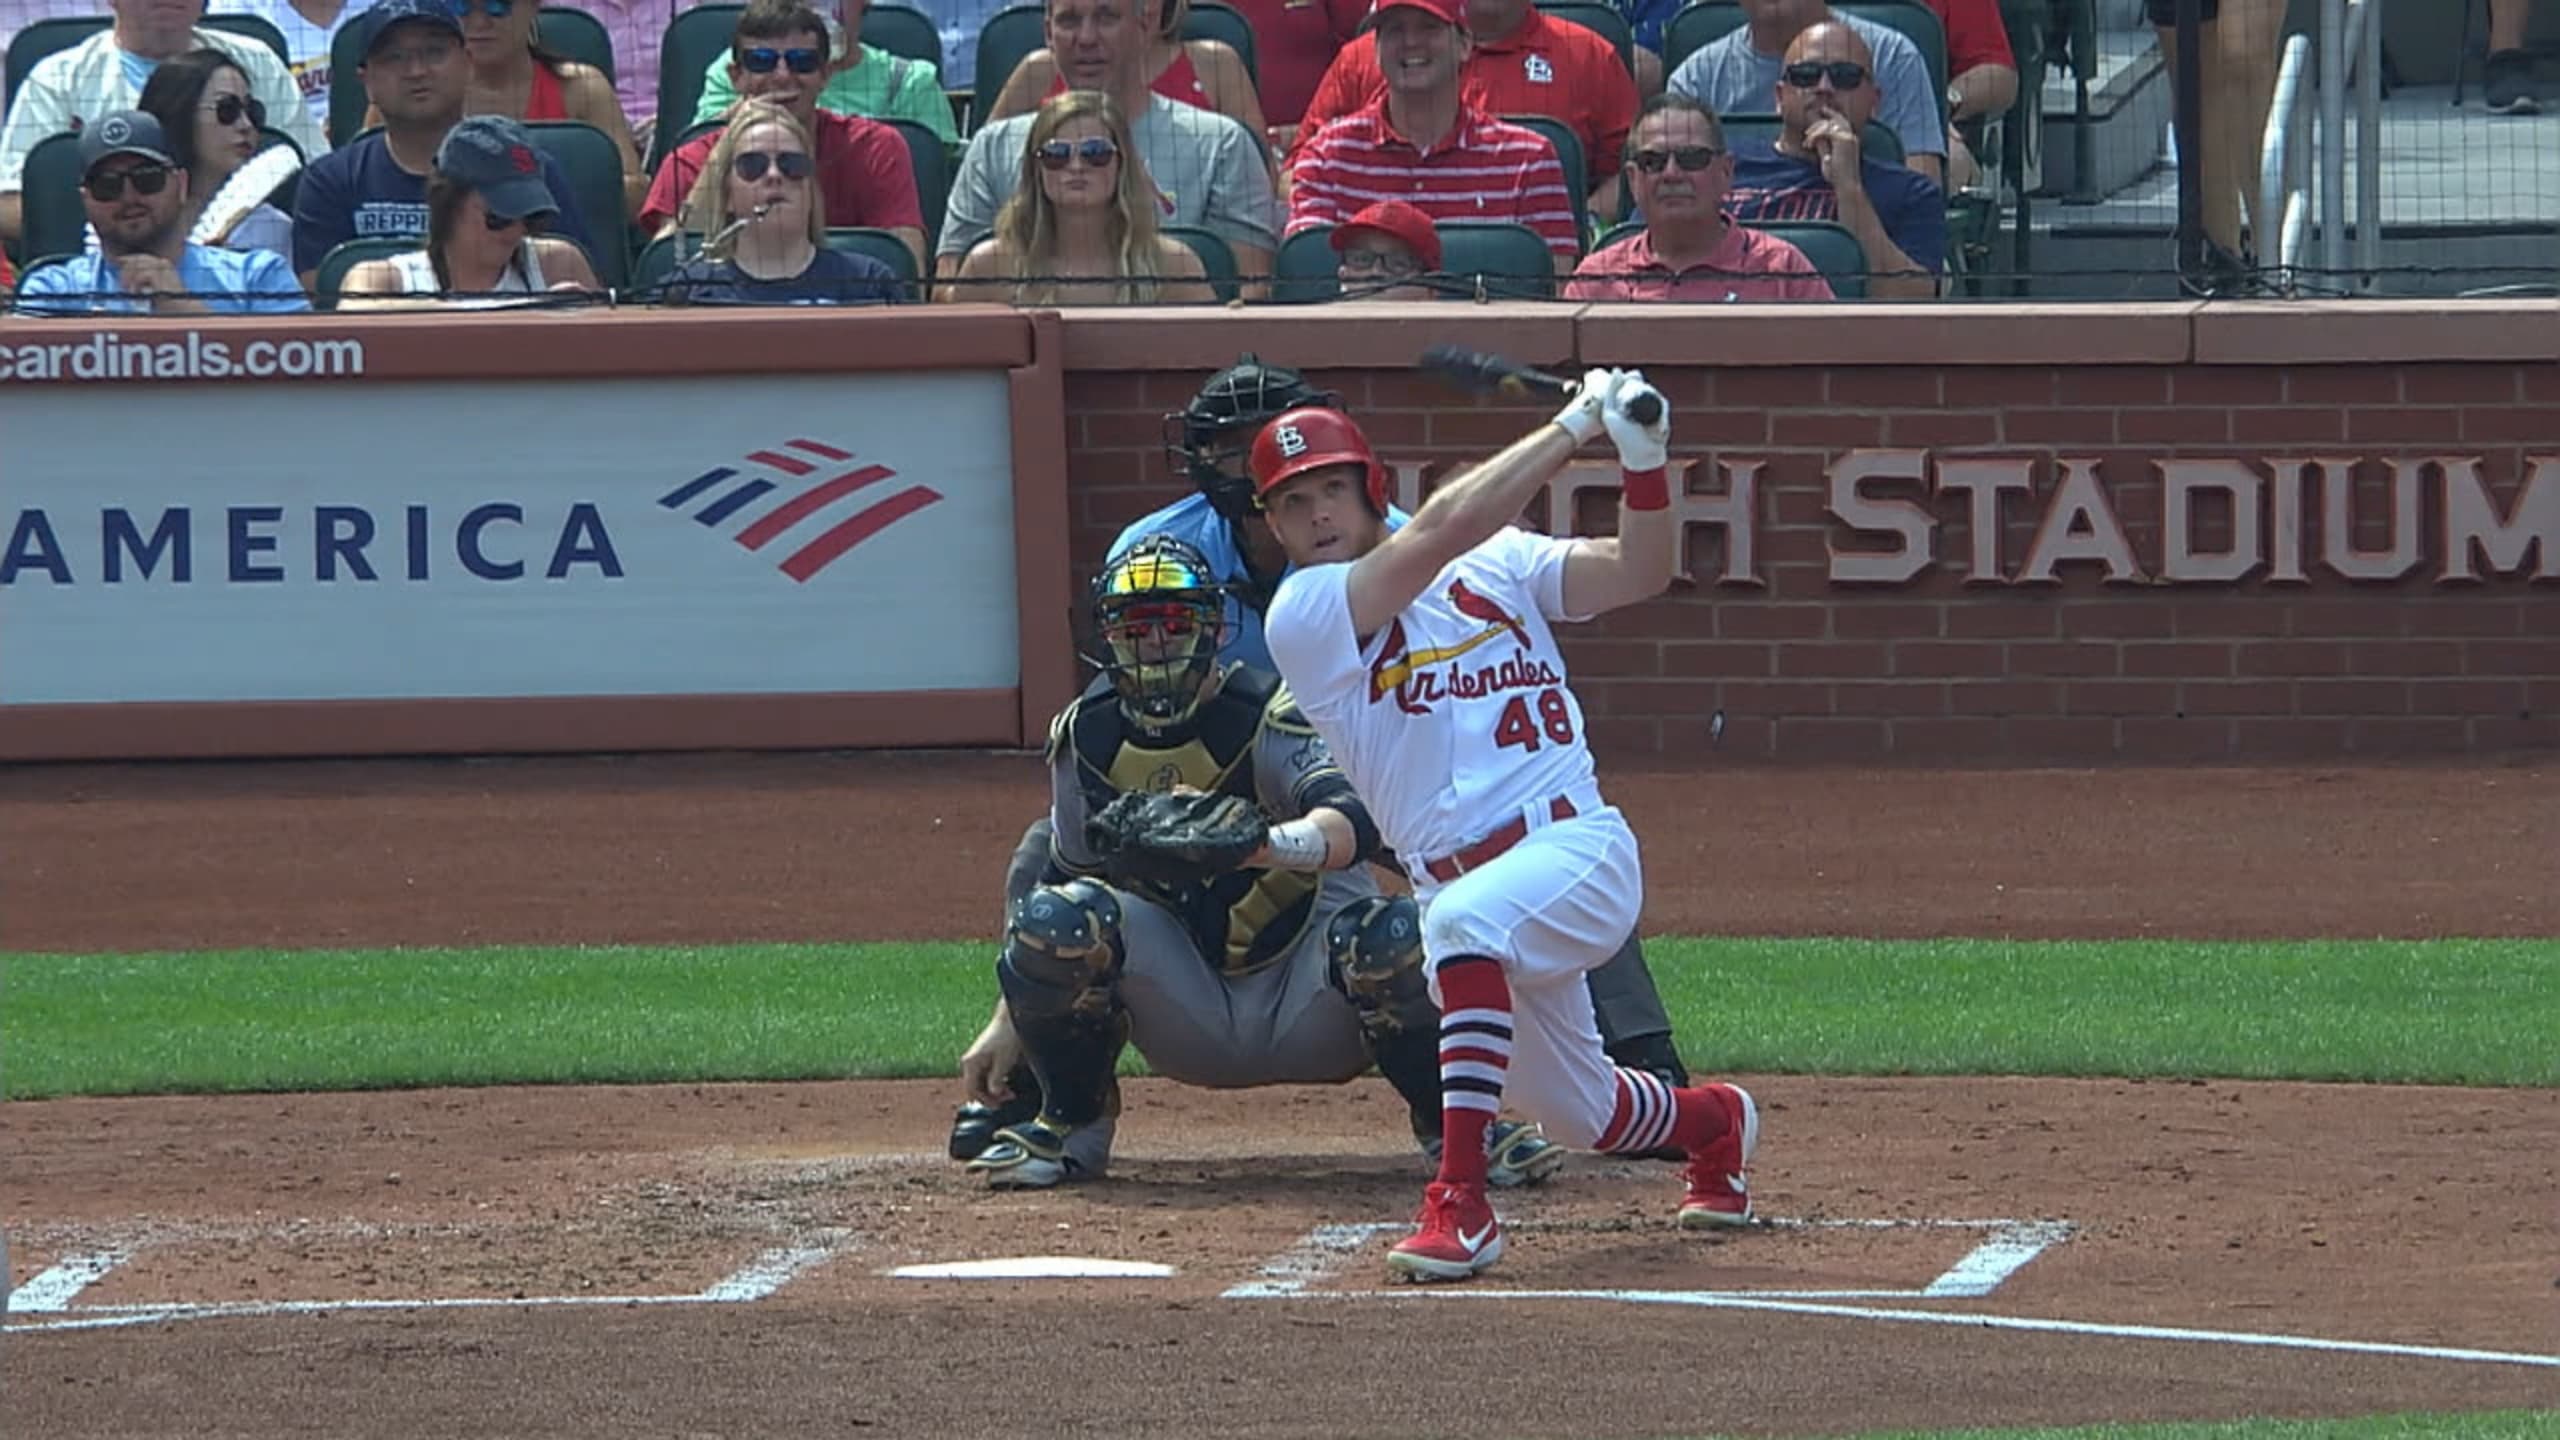 What to think about new Yankees Harrison Bader - Pinstripe Alley